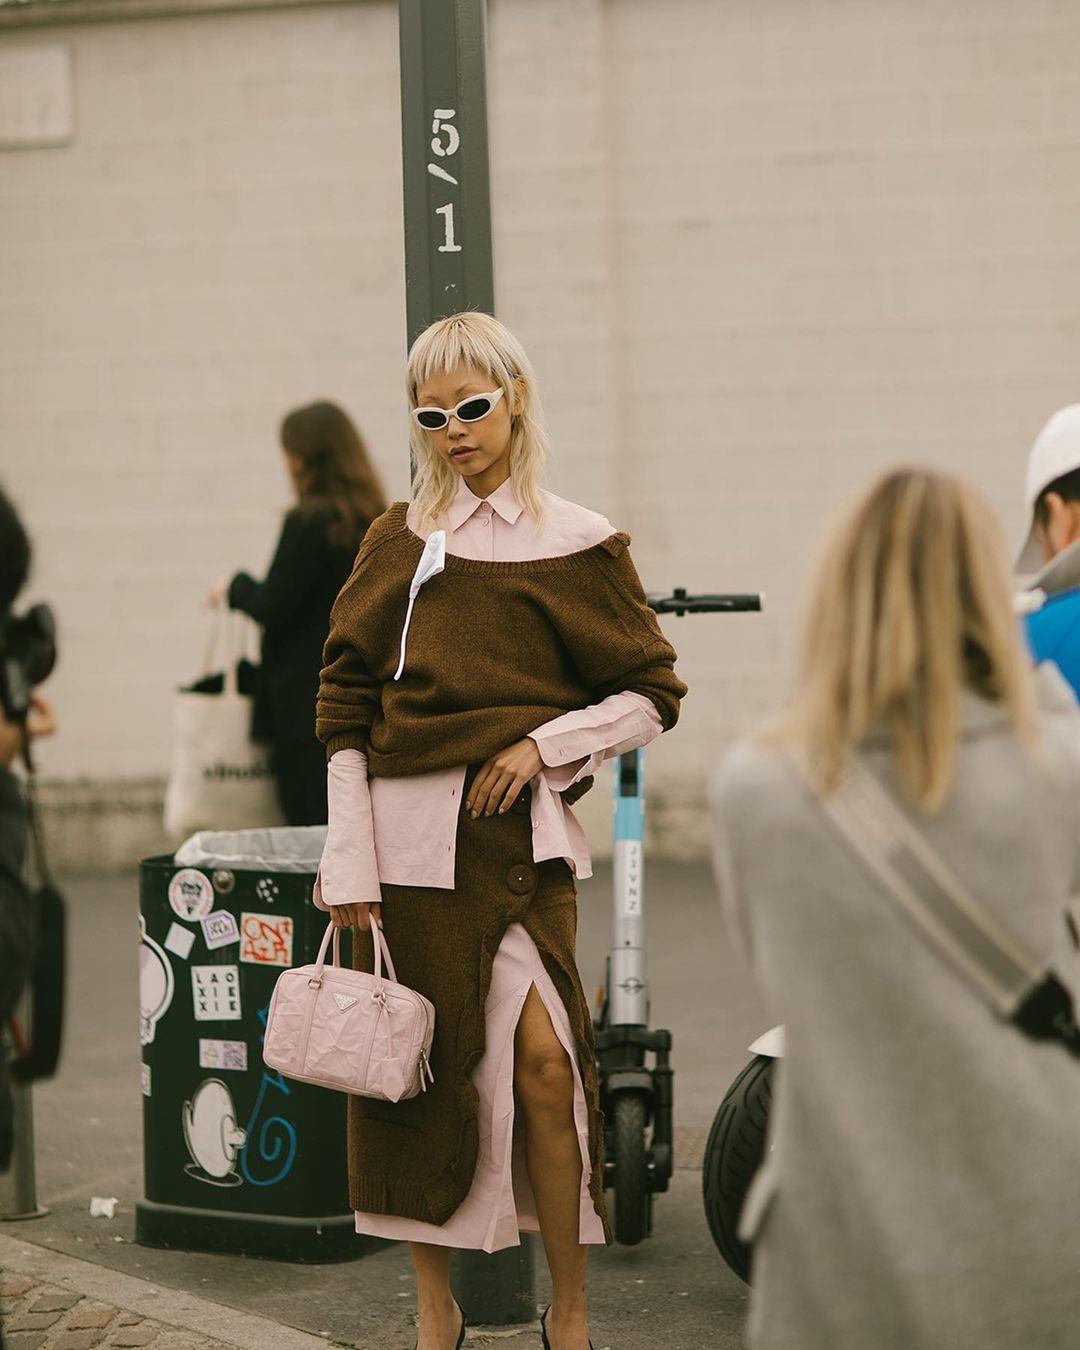 class="content__text"
 Ciao Milan. Swipe for our round-up of the very best street style from the streets of #MFW.

Photography @noorunisa 

 #MilanFashionWeek
 #BrownThomas 
 